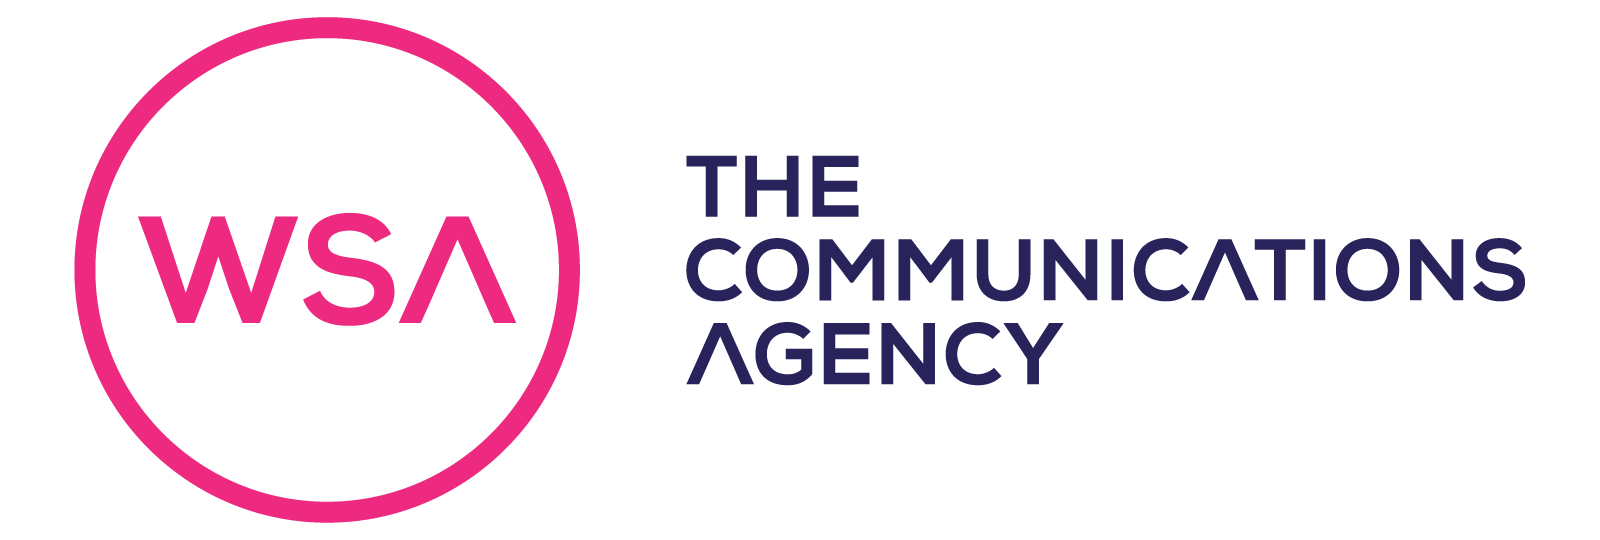 WSA – The Communications Agency